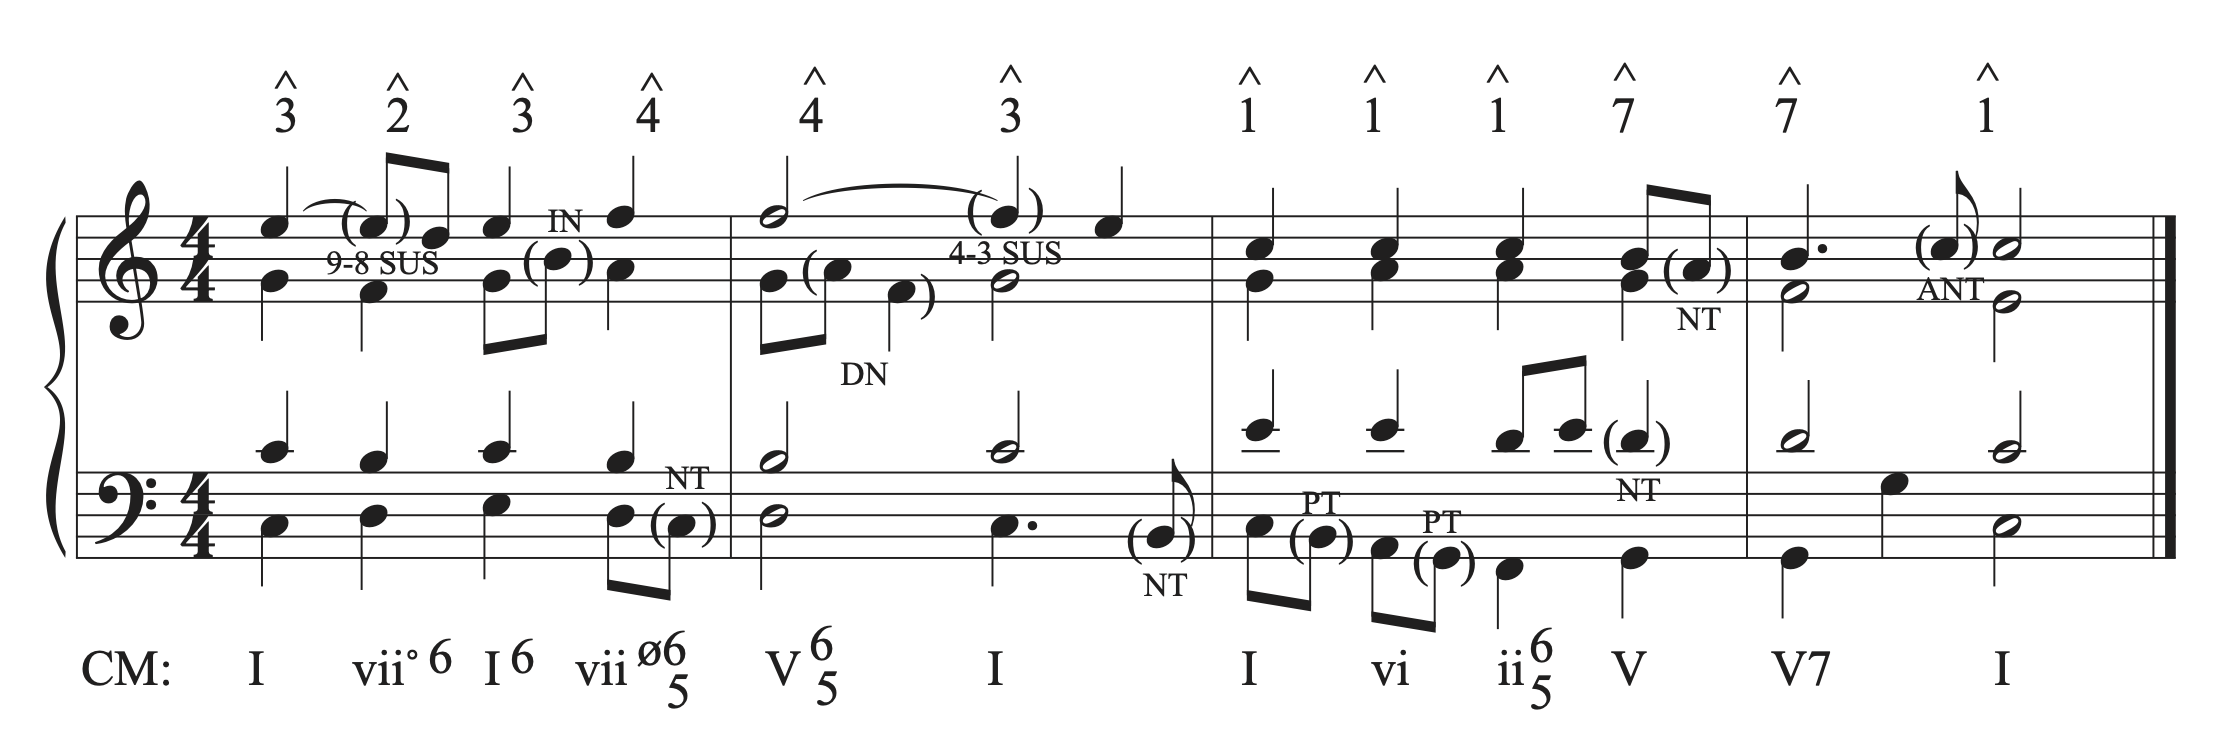 The musical example in C major with a double neighbor added.